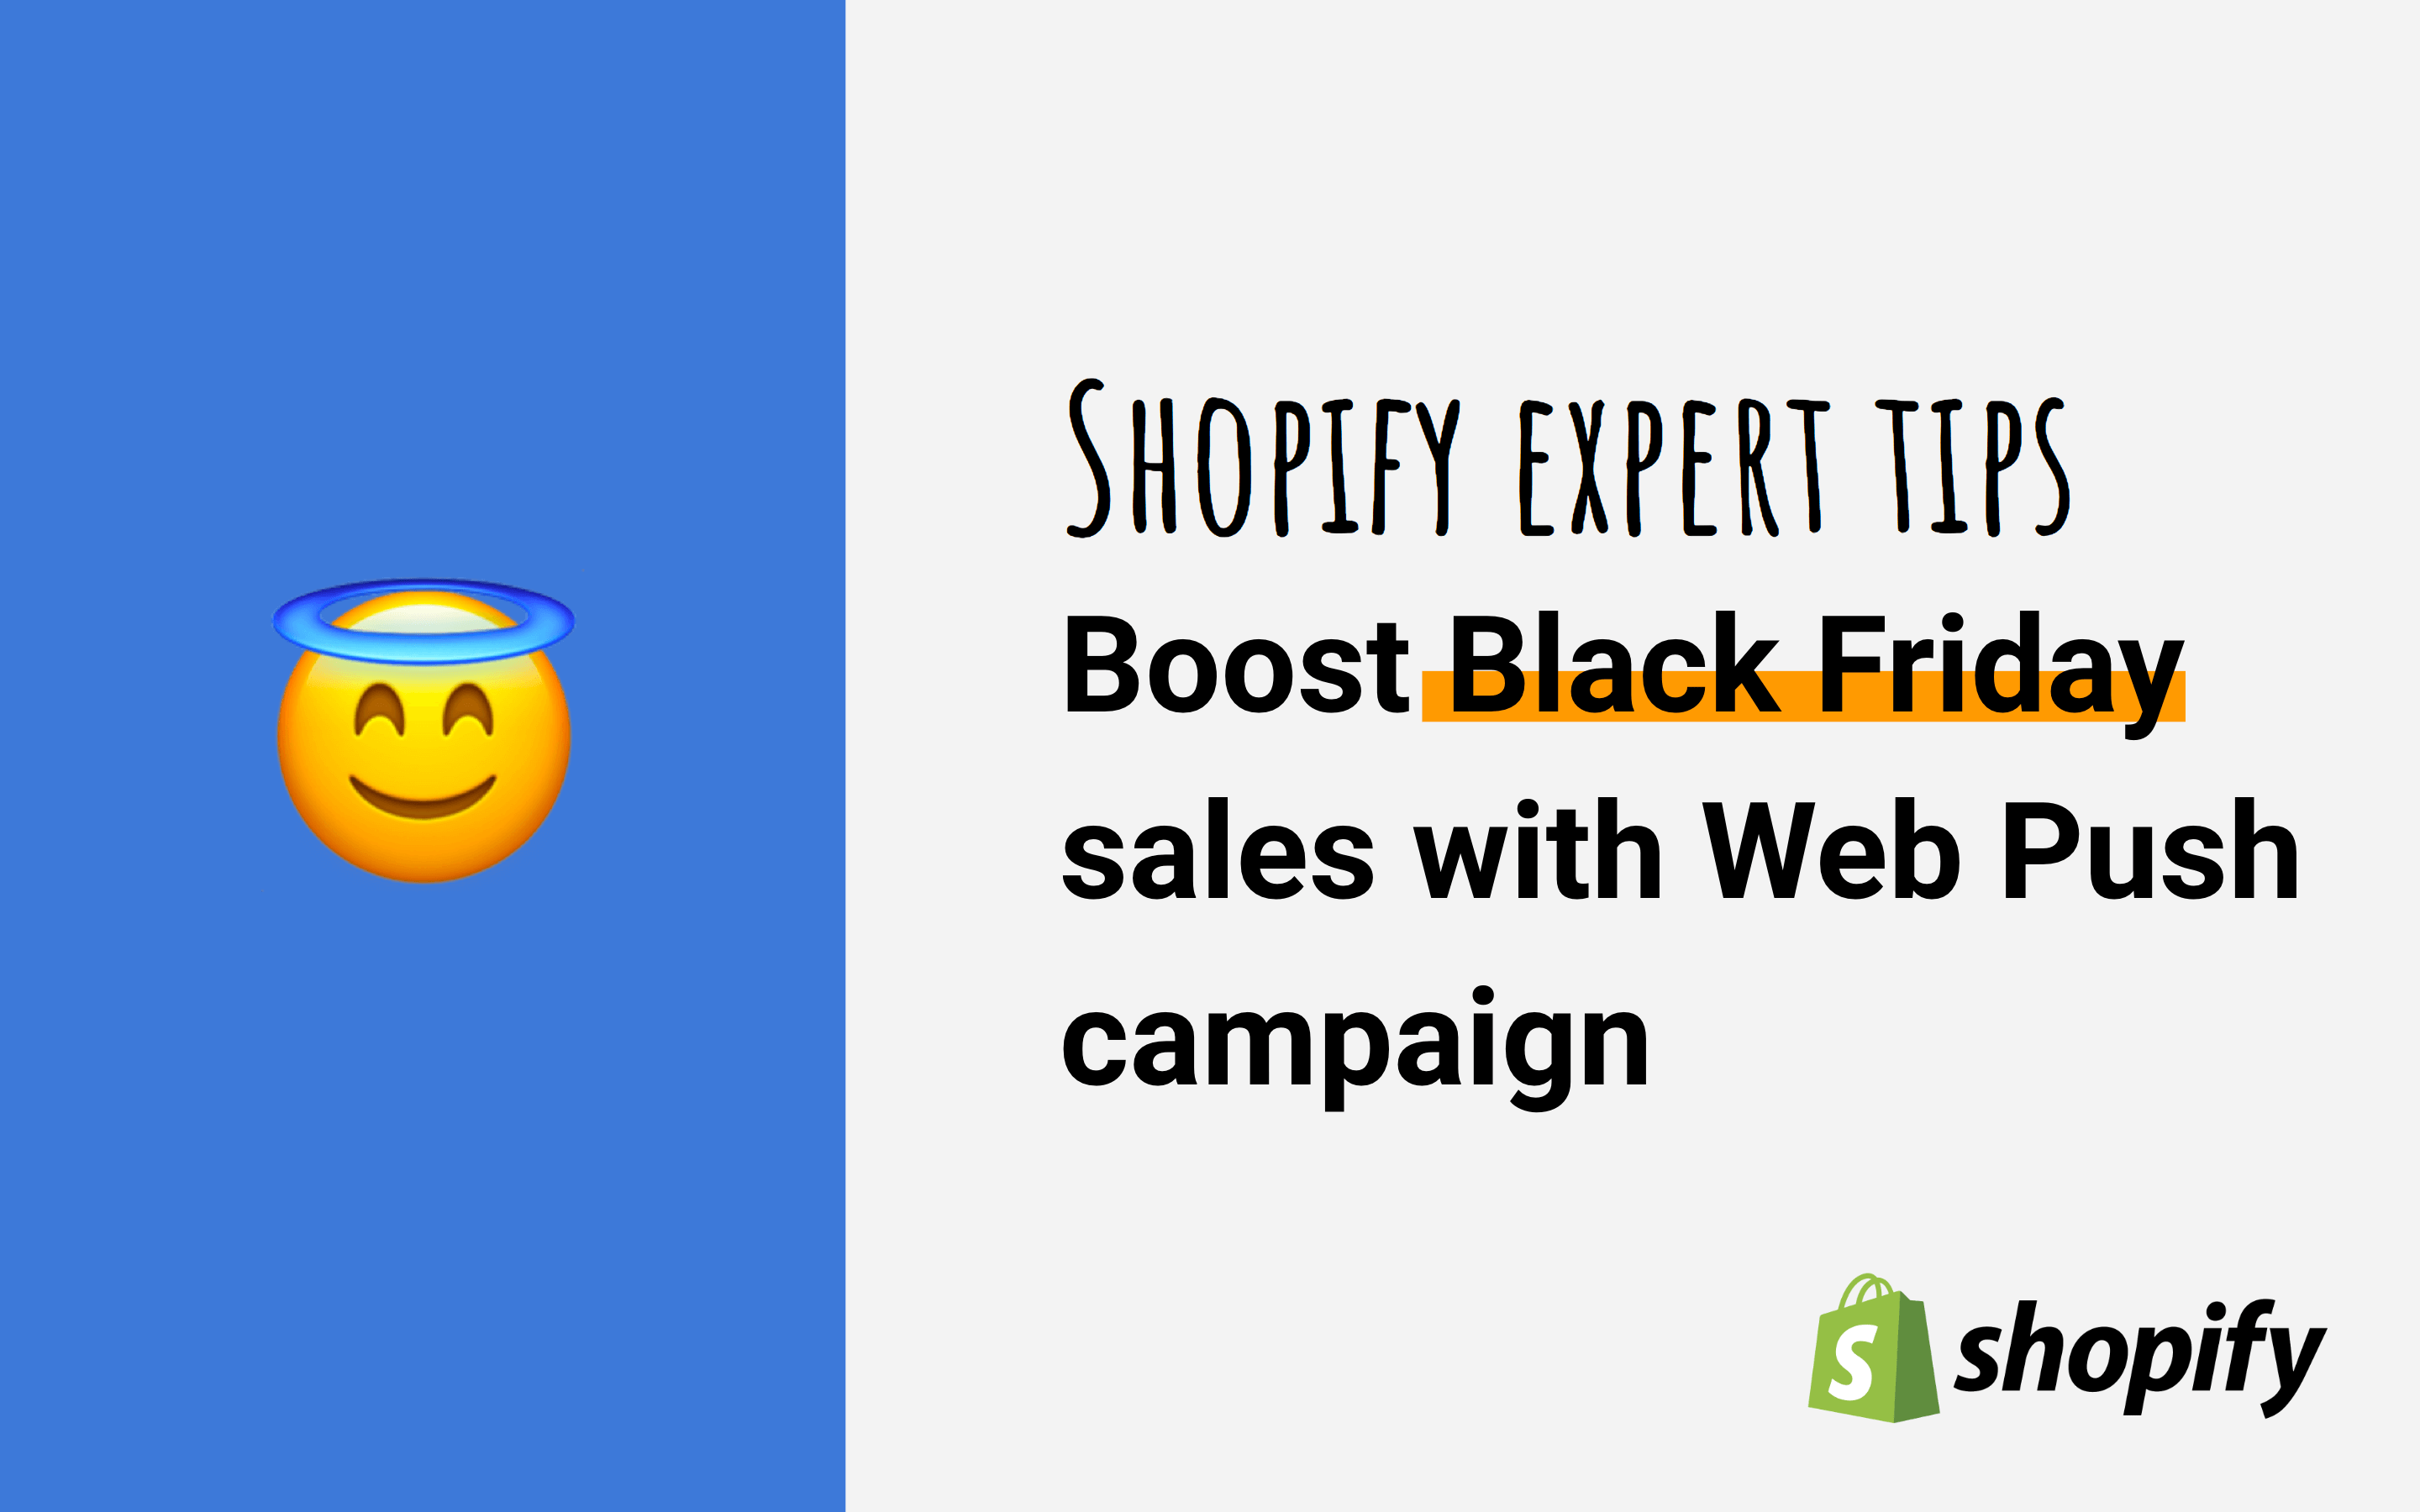 Shopify Expert Tips: Boost Black Friday sales with Web Push campaign